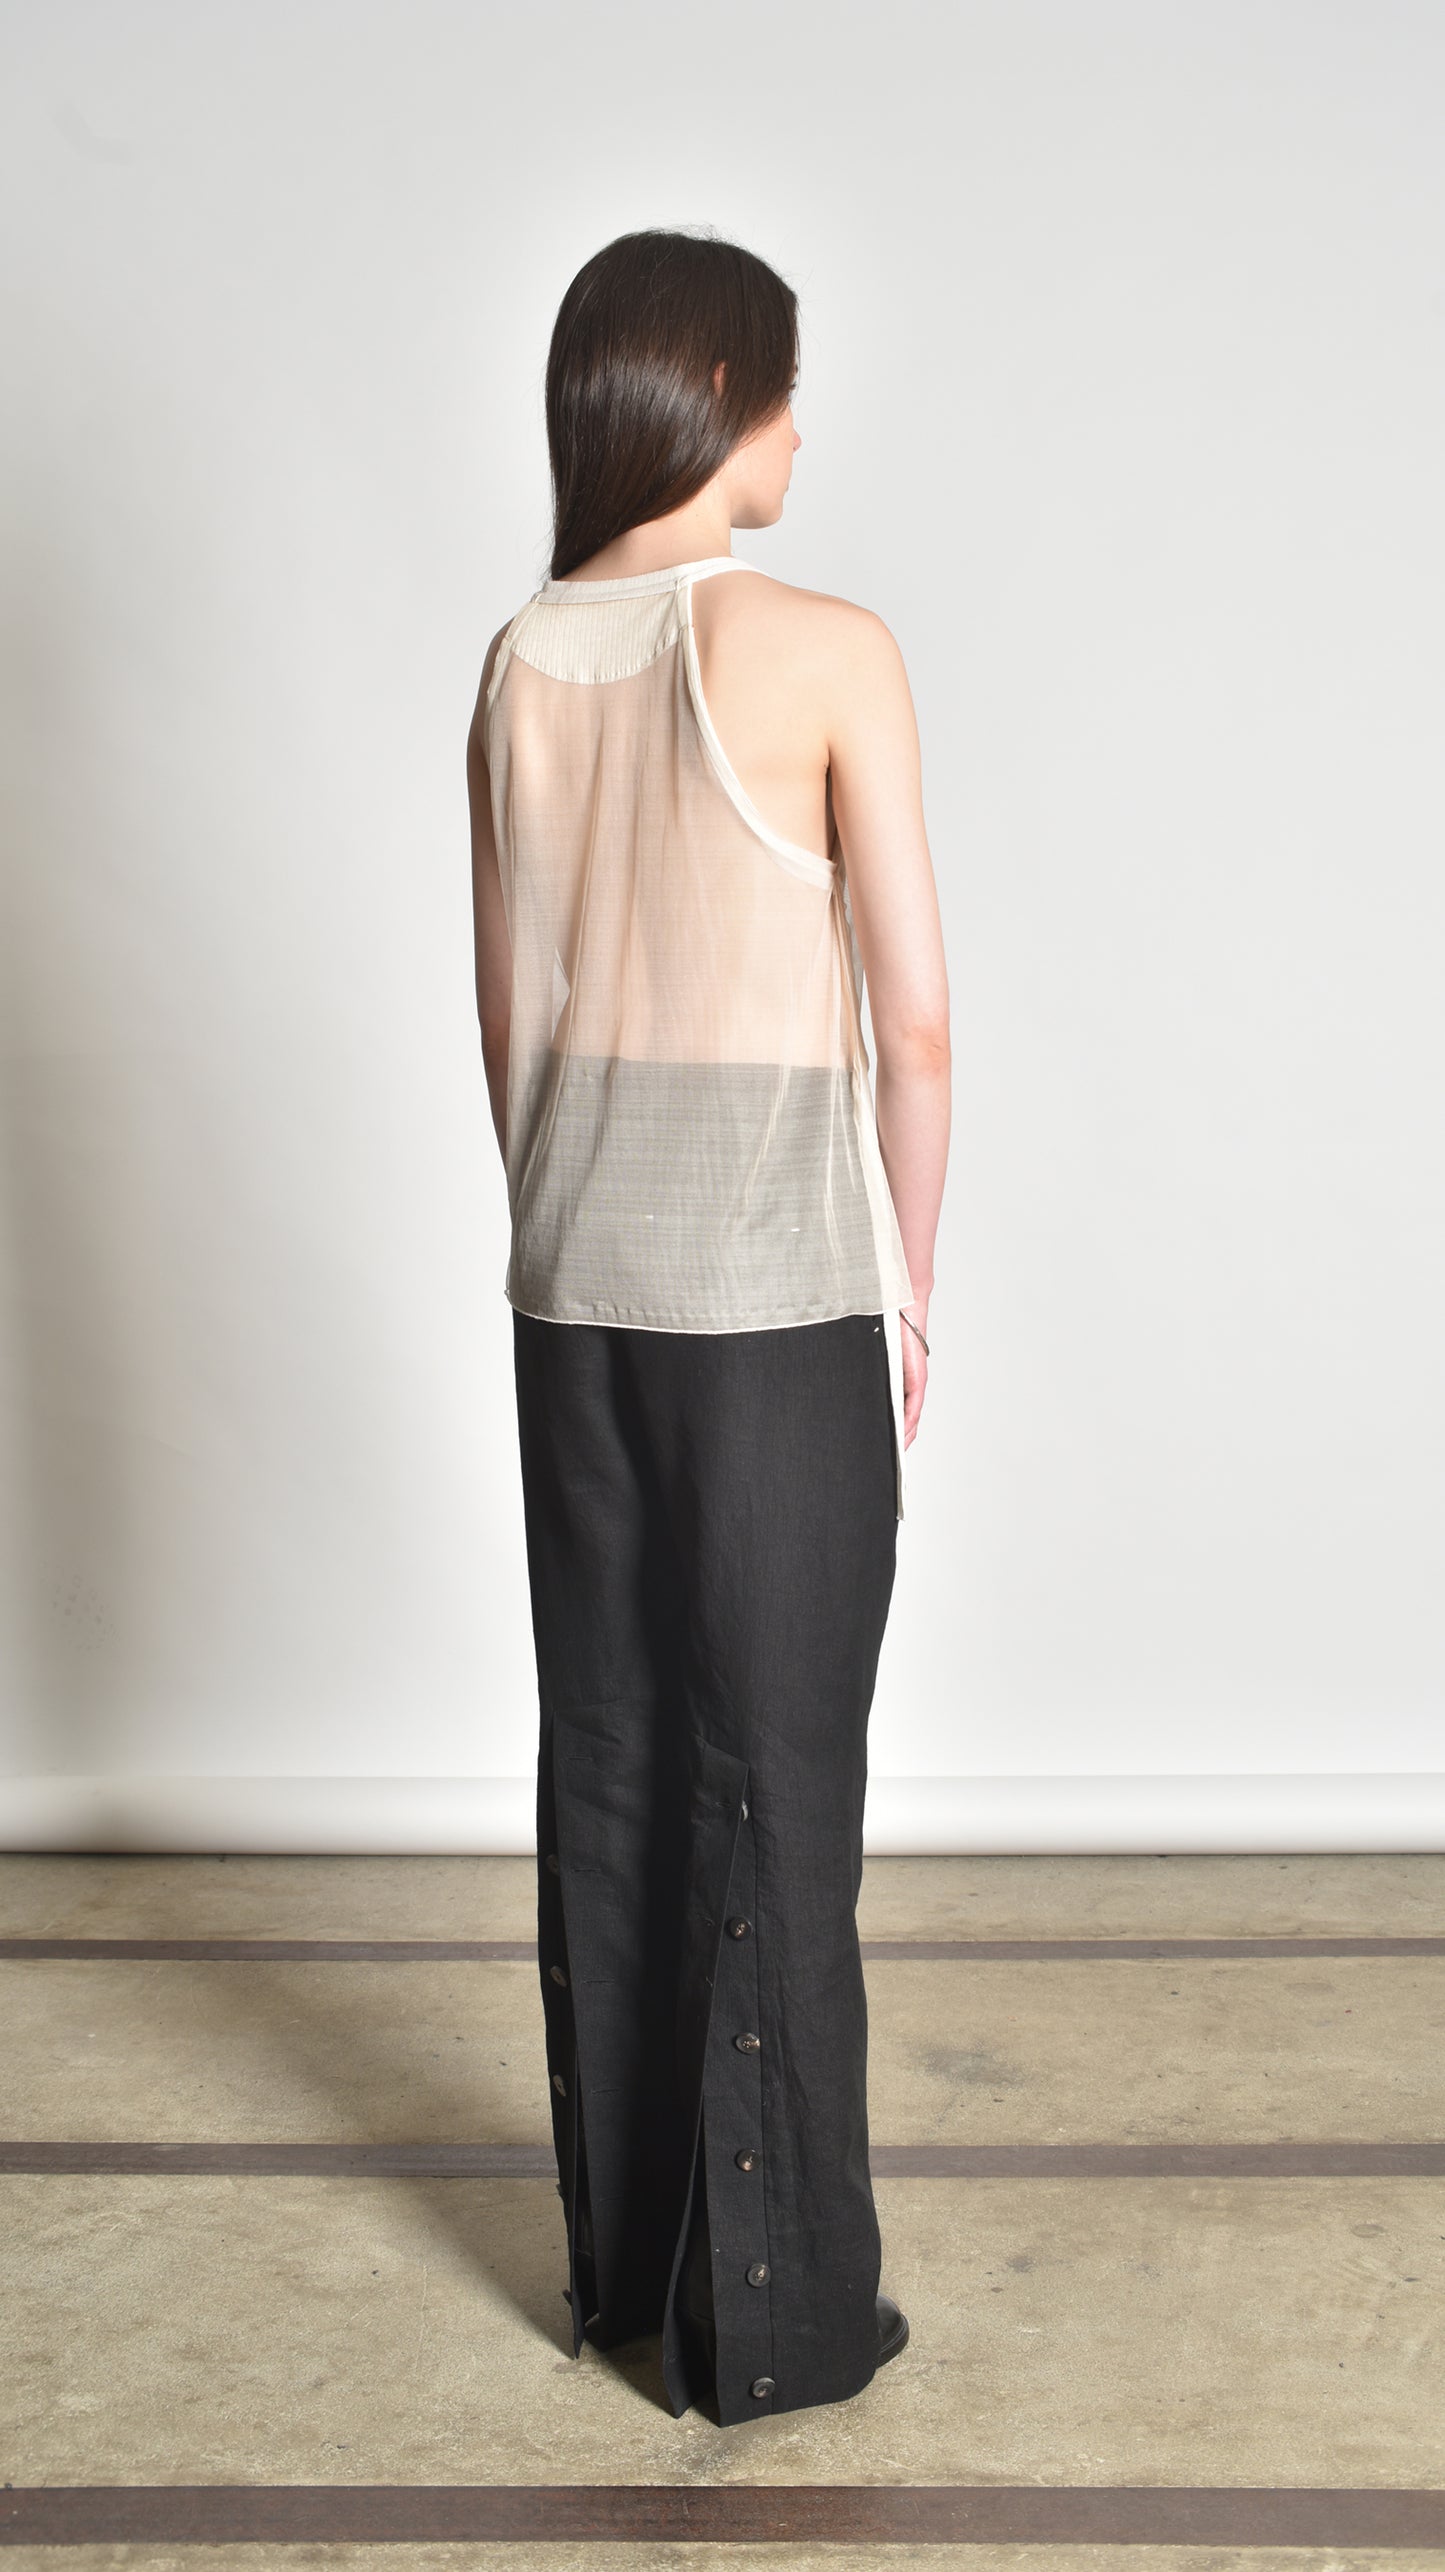 Deconstructed Sidetaped Tanktop (last one size 38)